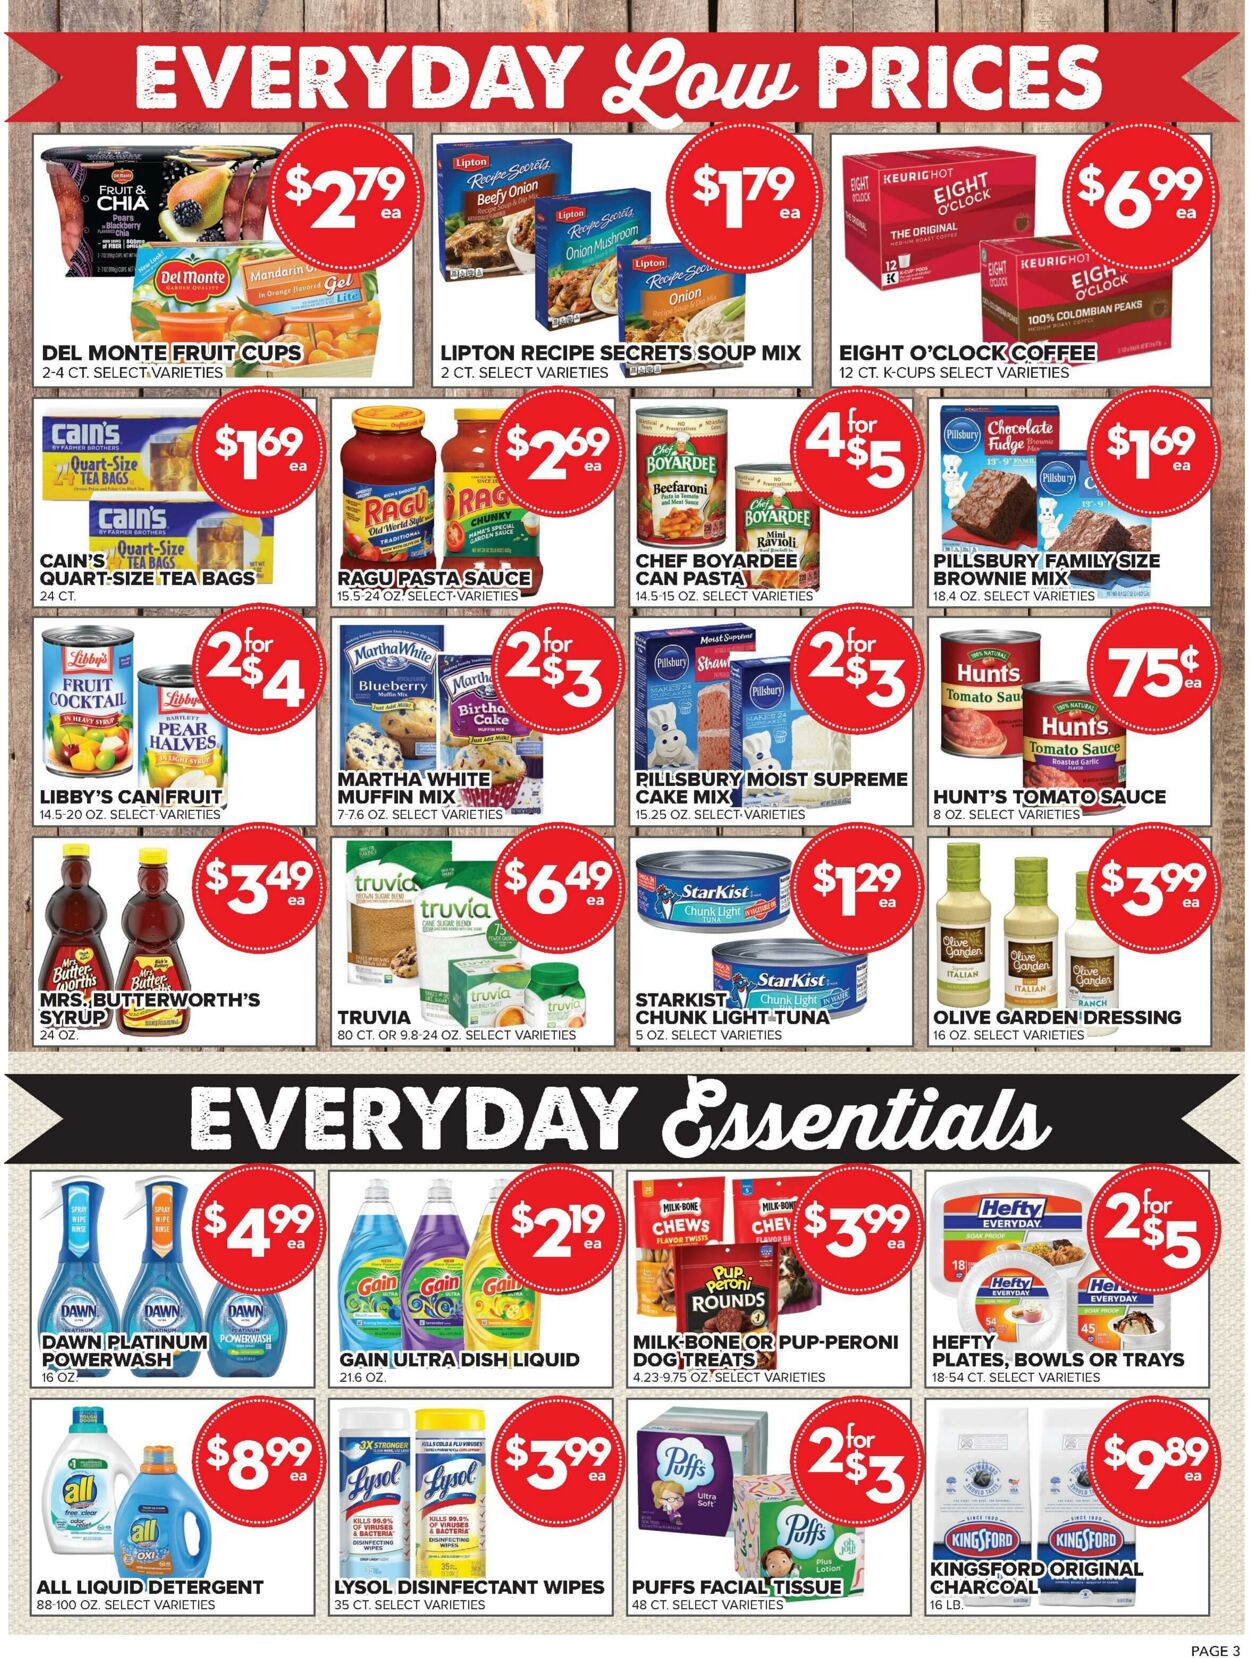 Weekly ad Price Cutter 08/03/2022 - 09/06/2022